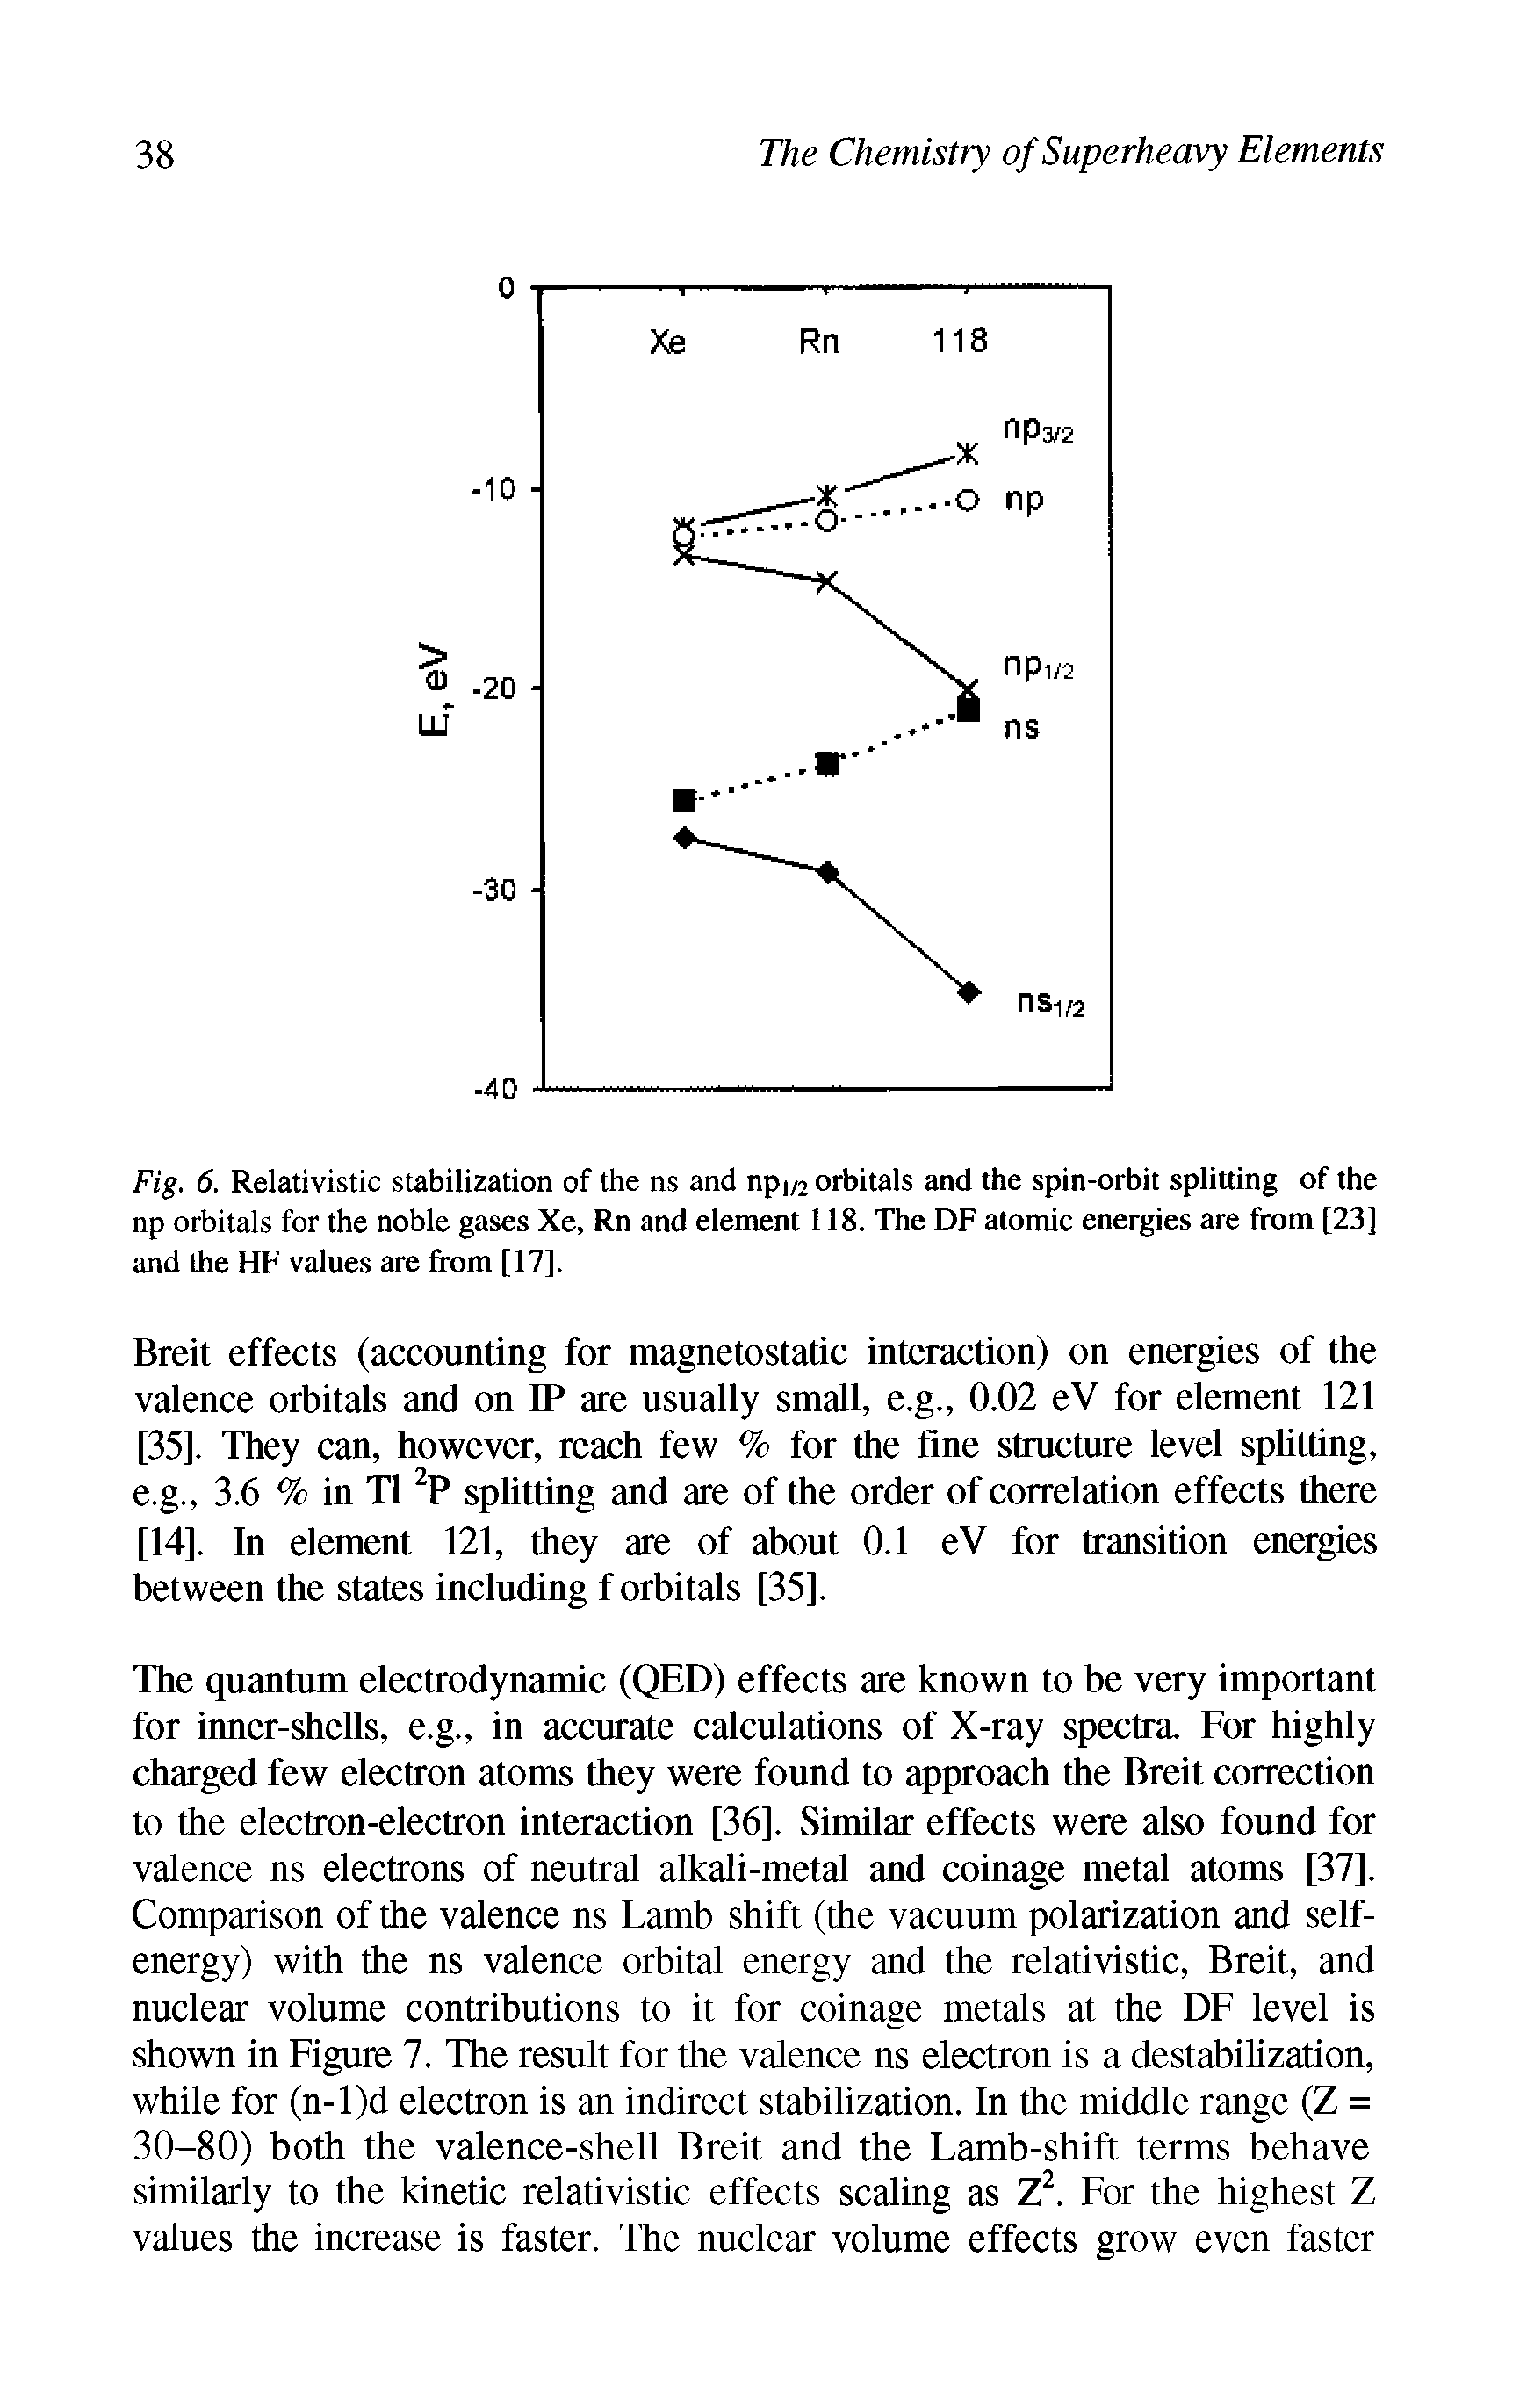 Fig. 6. Relativistic stabilization of the ns and npi/2 orbitals and the spin-orbit splitting of the np orbitals for the noble gases Xe, Rn and element 118. The DF atomic energies are from [23] and the HF values are from [17].